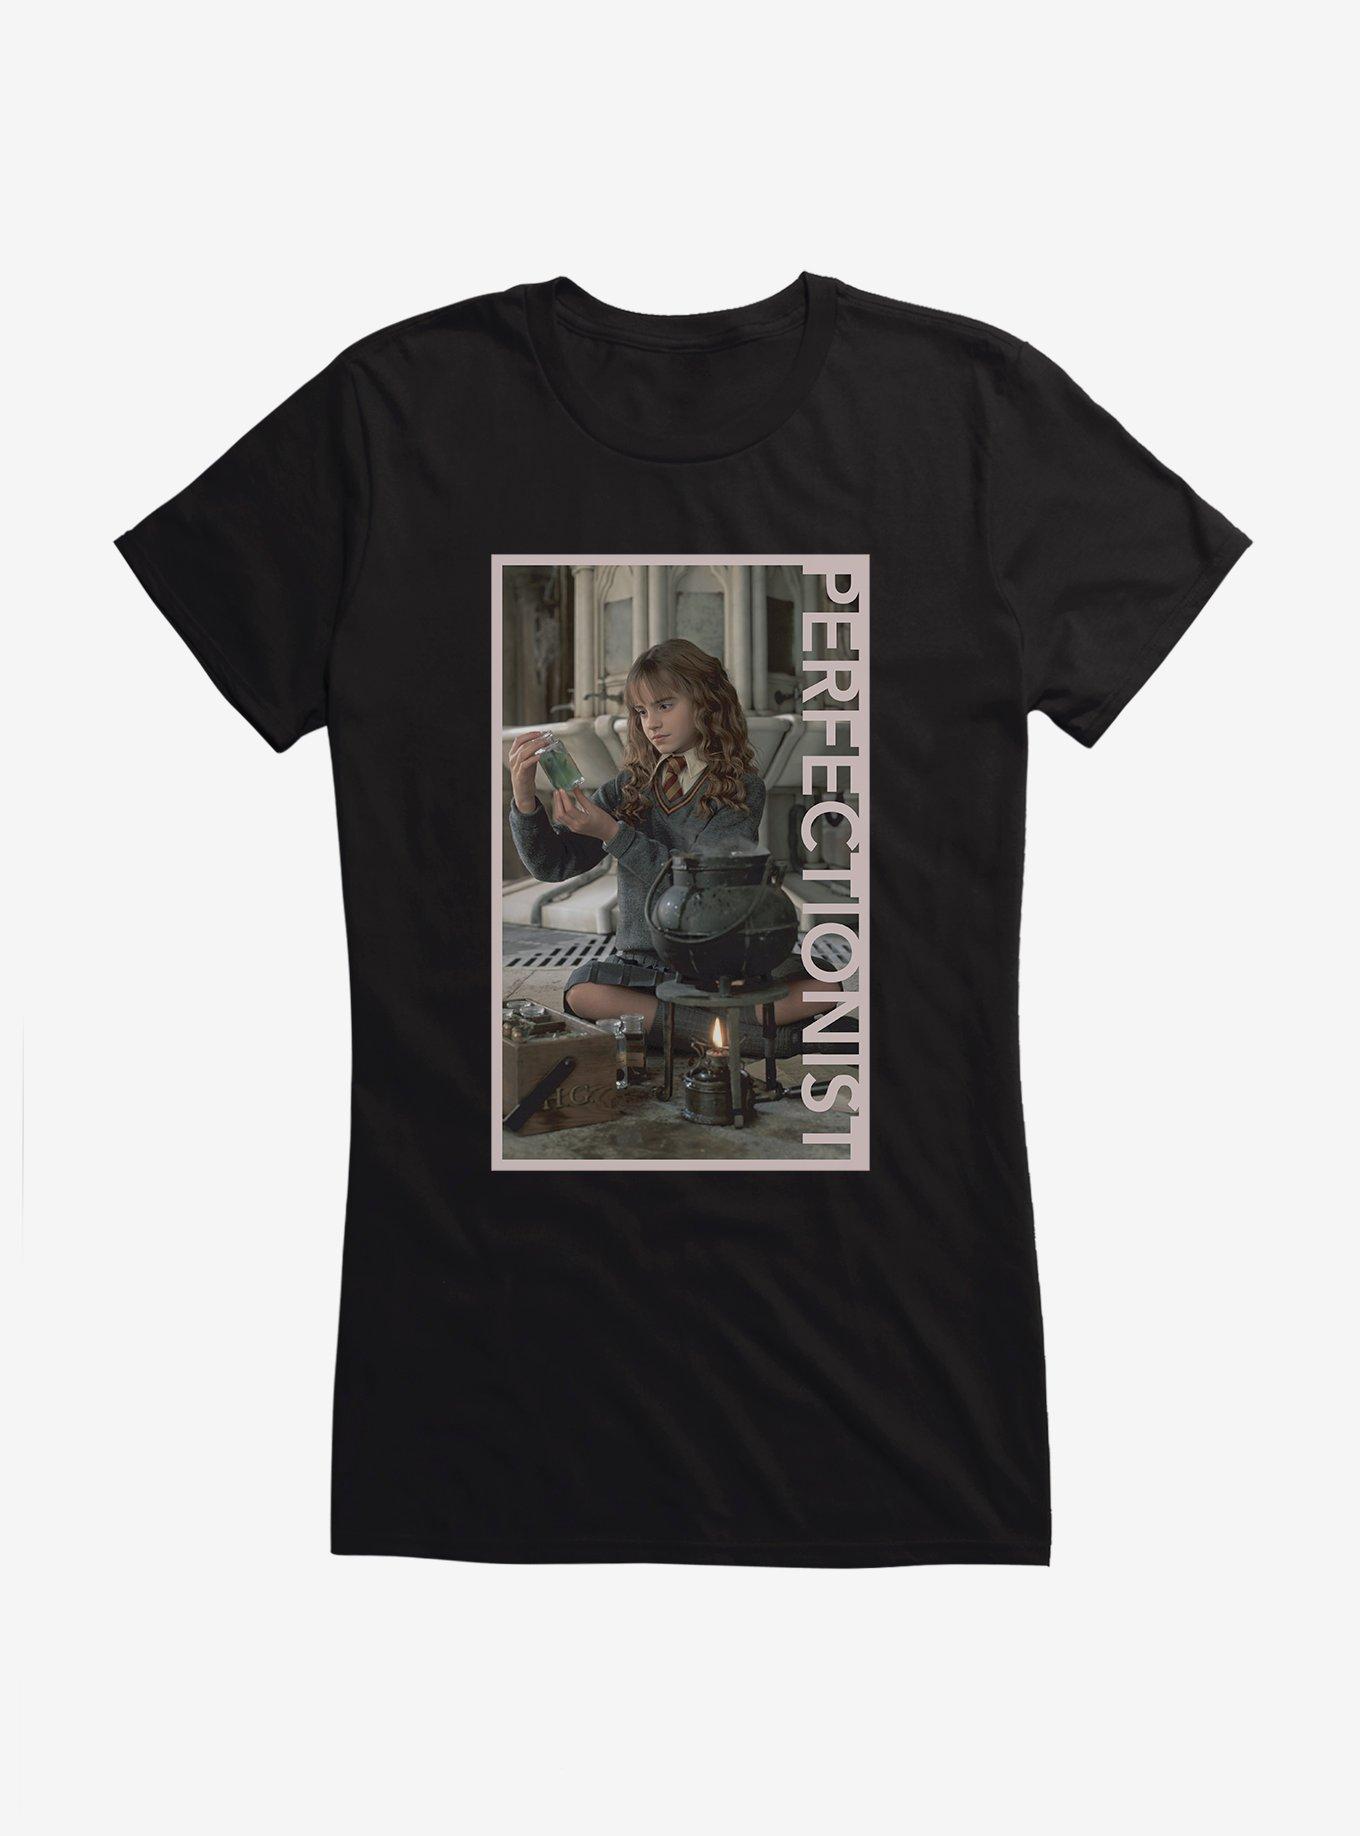 Harry Potter Perfectionist Hermione Girls T-Shirt